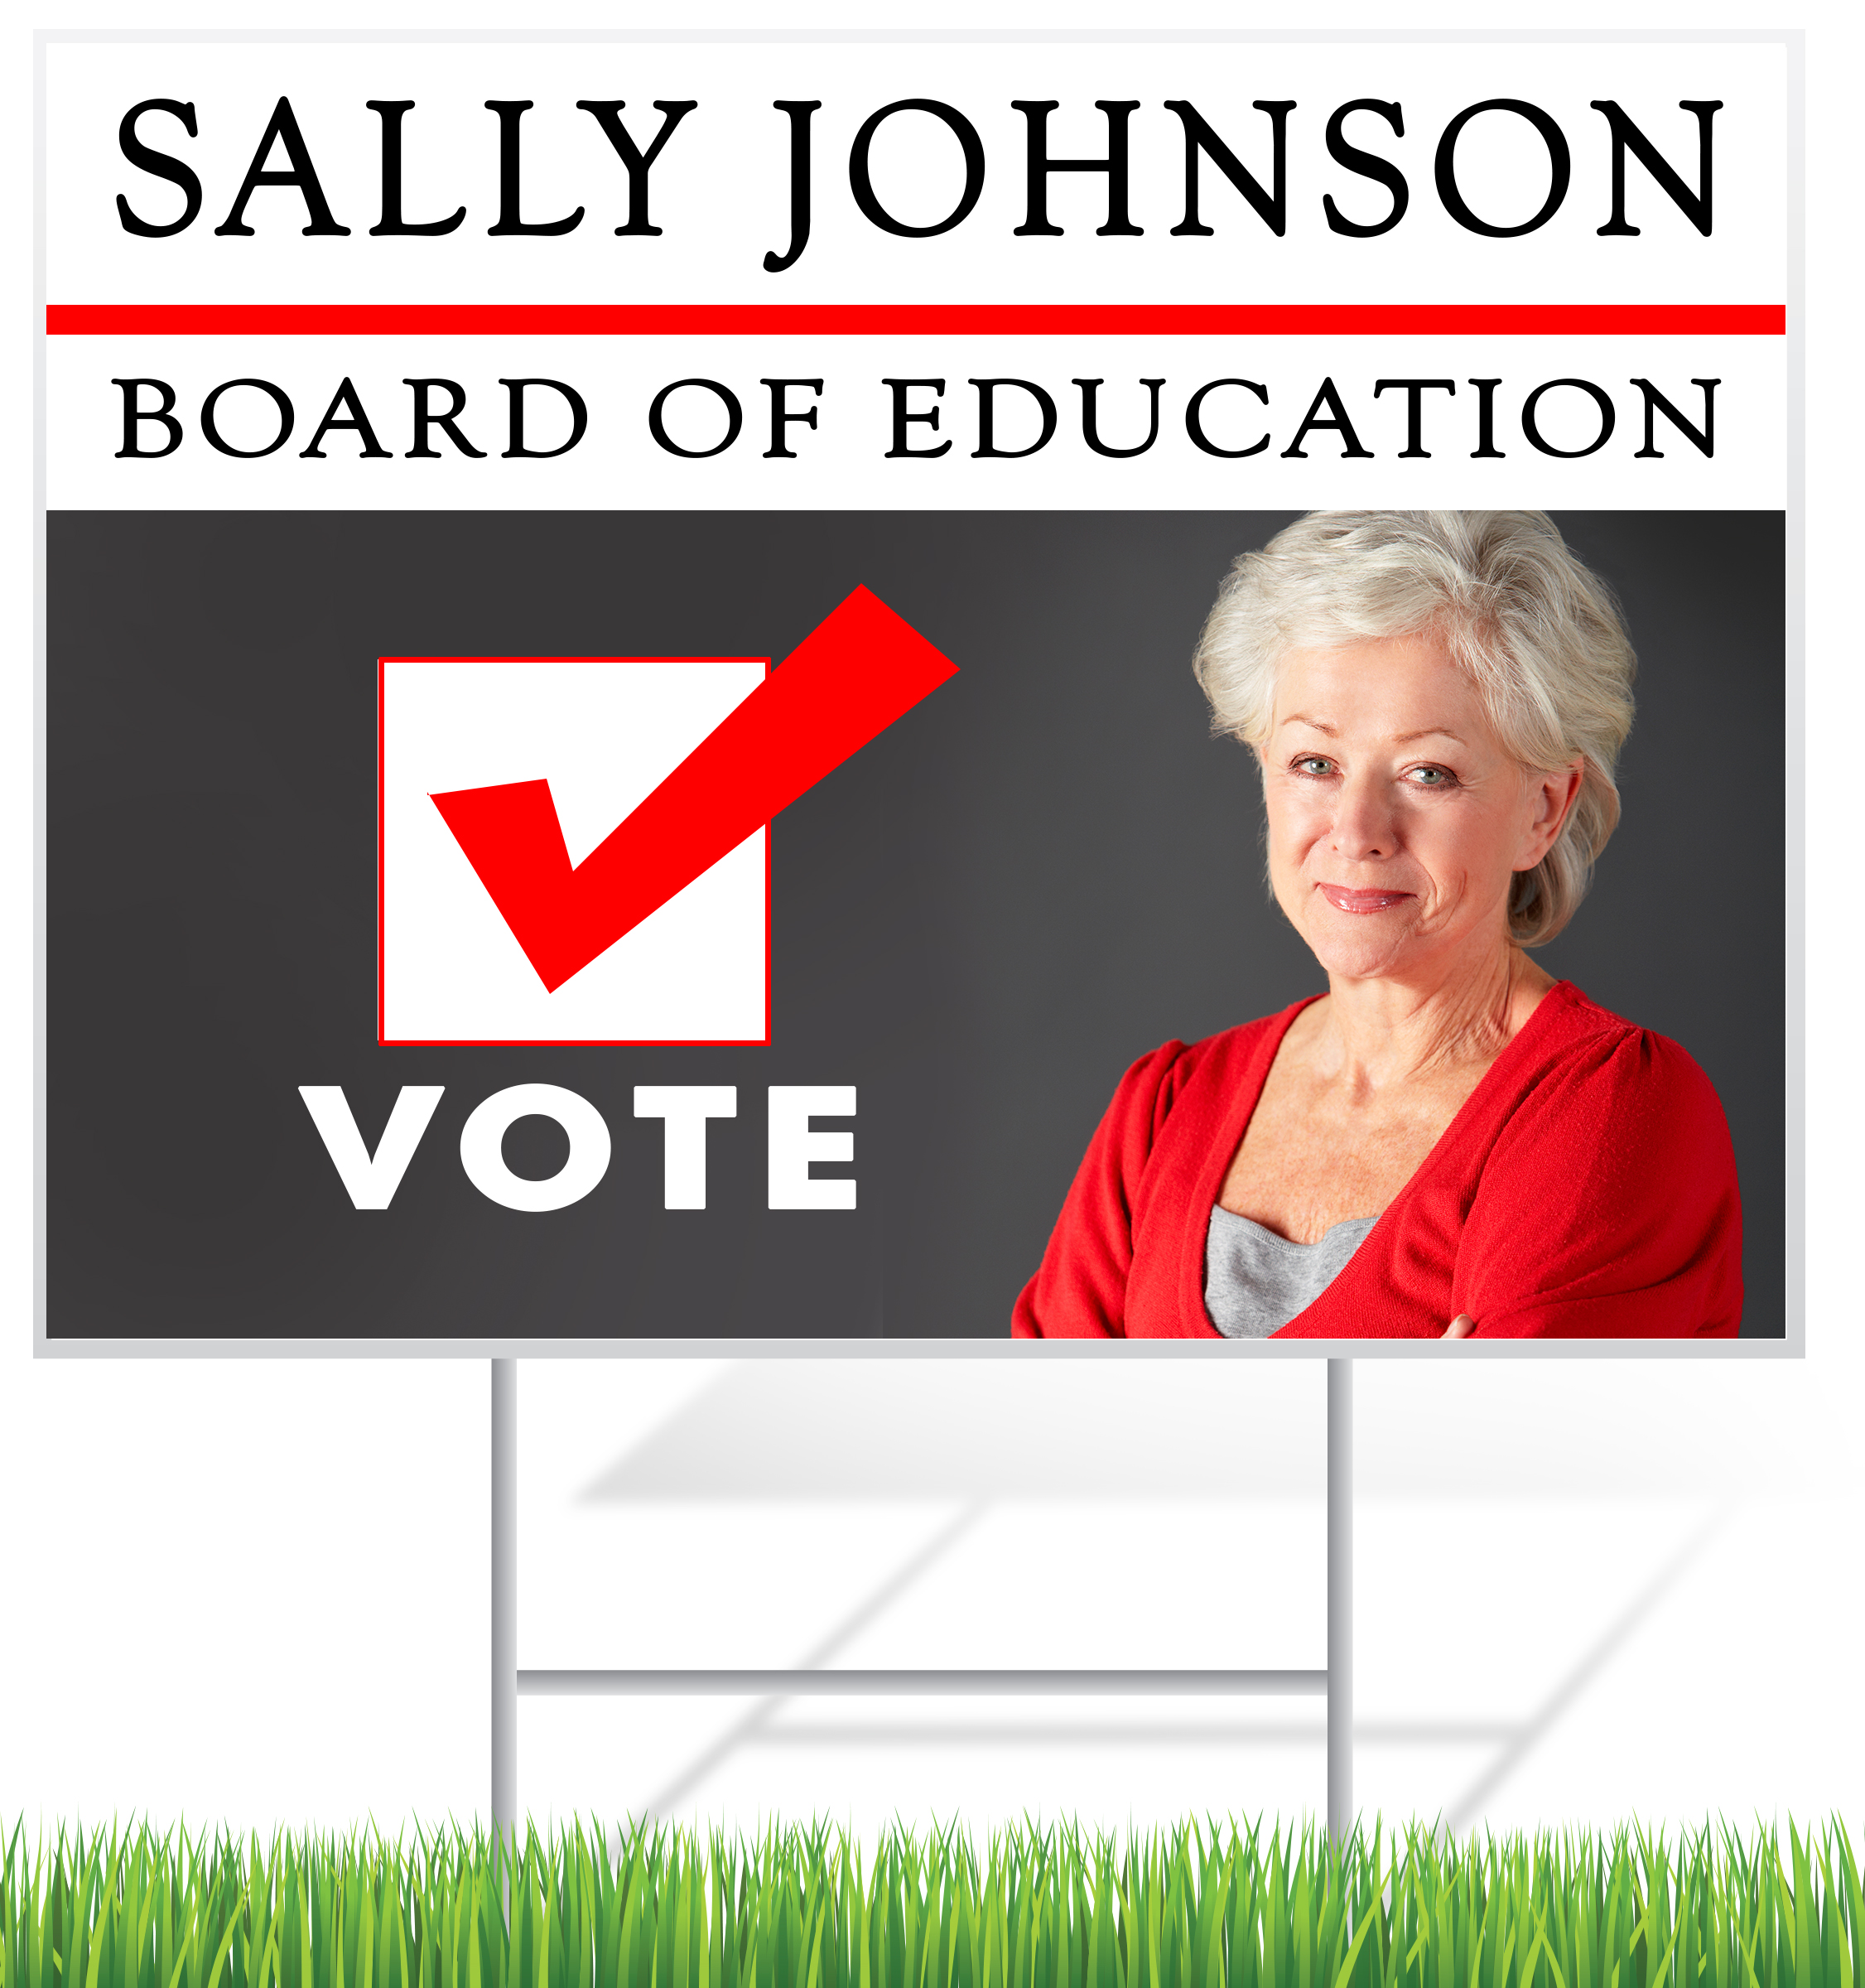 Board of Education Political Lawn Sign Example | LawnSigns.com